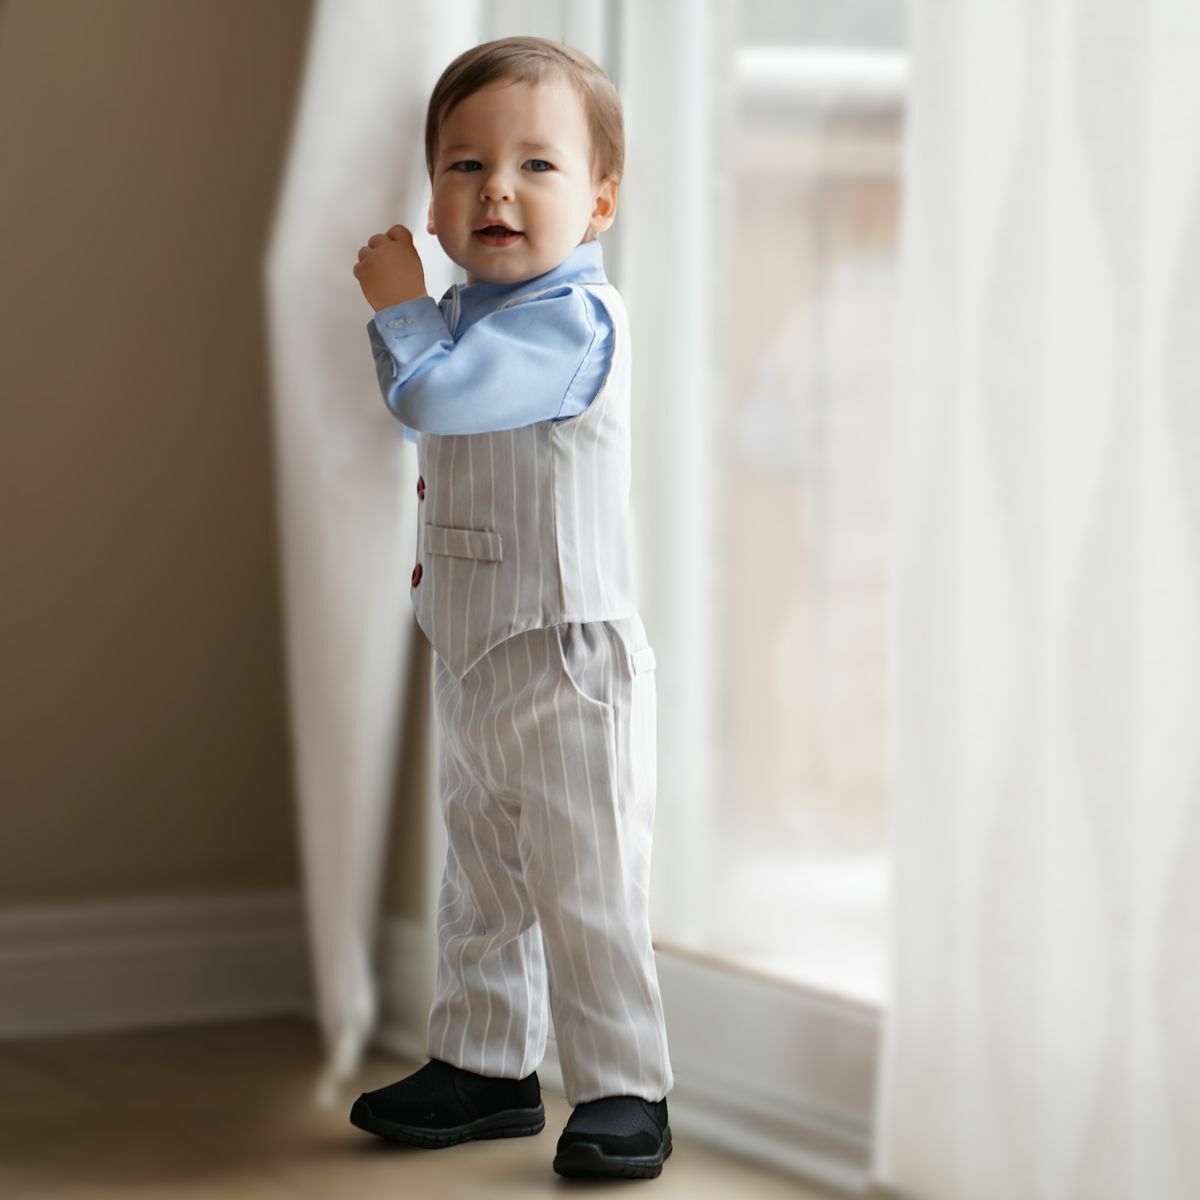 Toddler in grey striped suit and light blue shirt